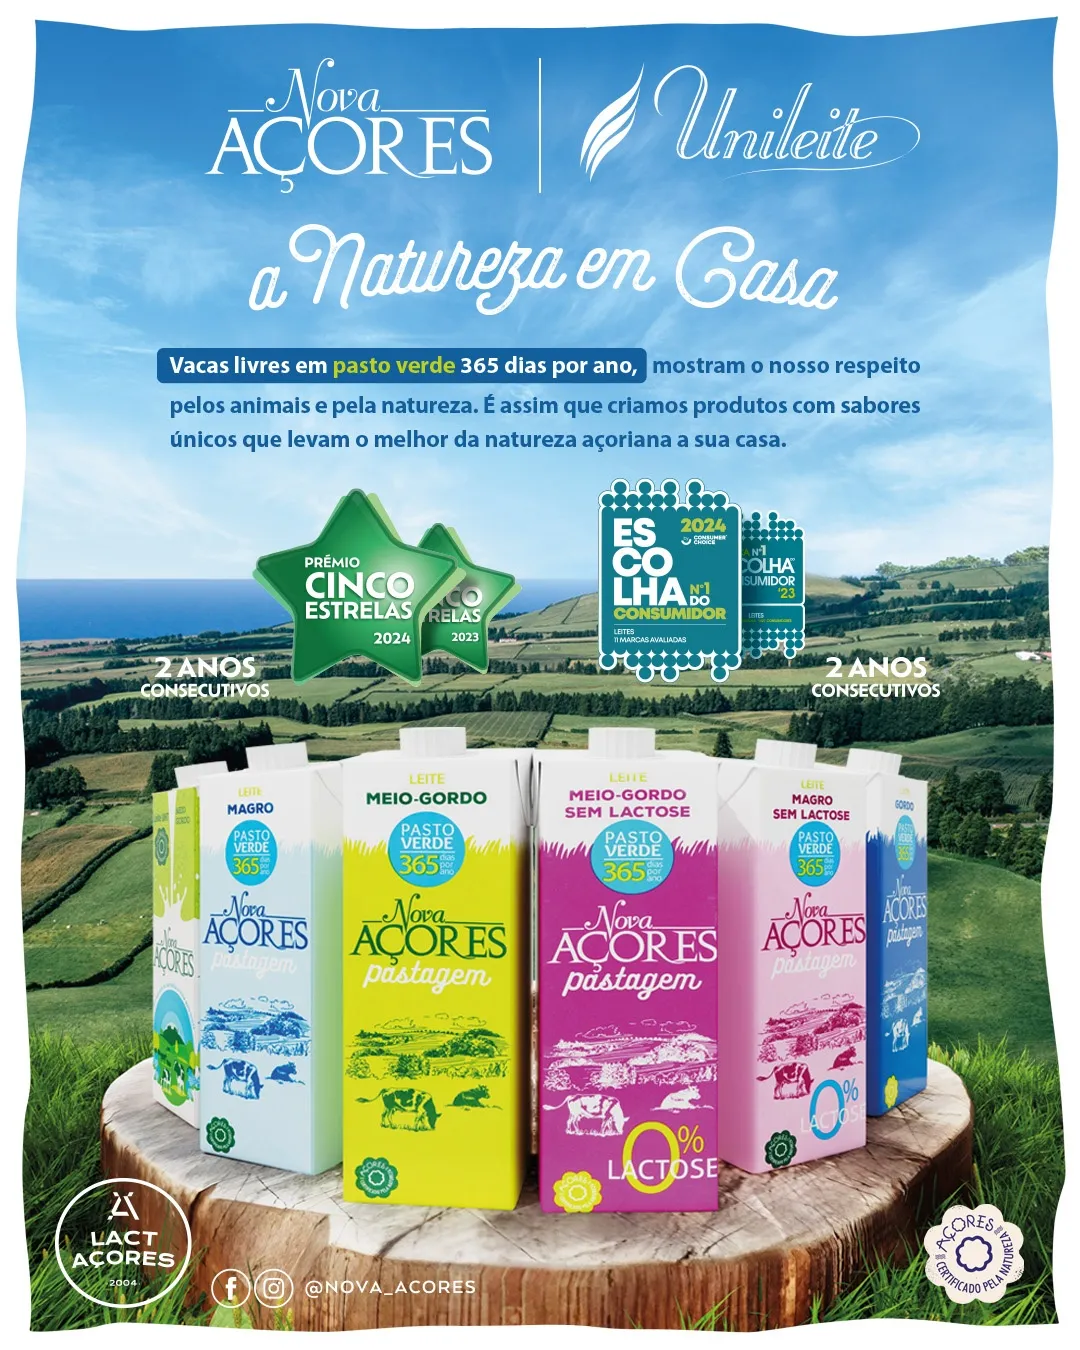 Nova Açores range of milks awarded 5 Star and Consumer Choice prizes for the 2nd year running